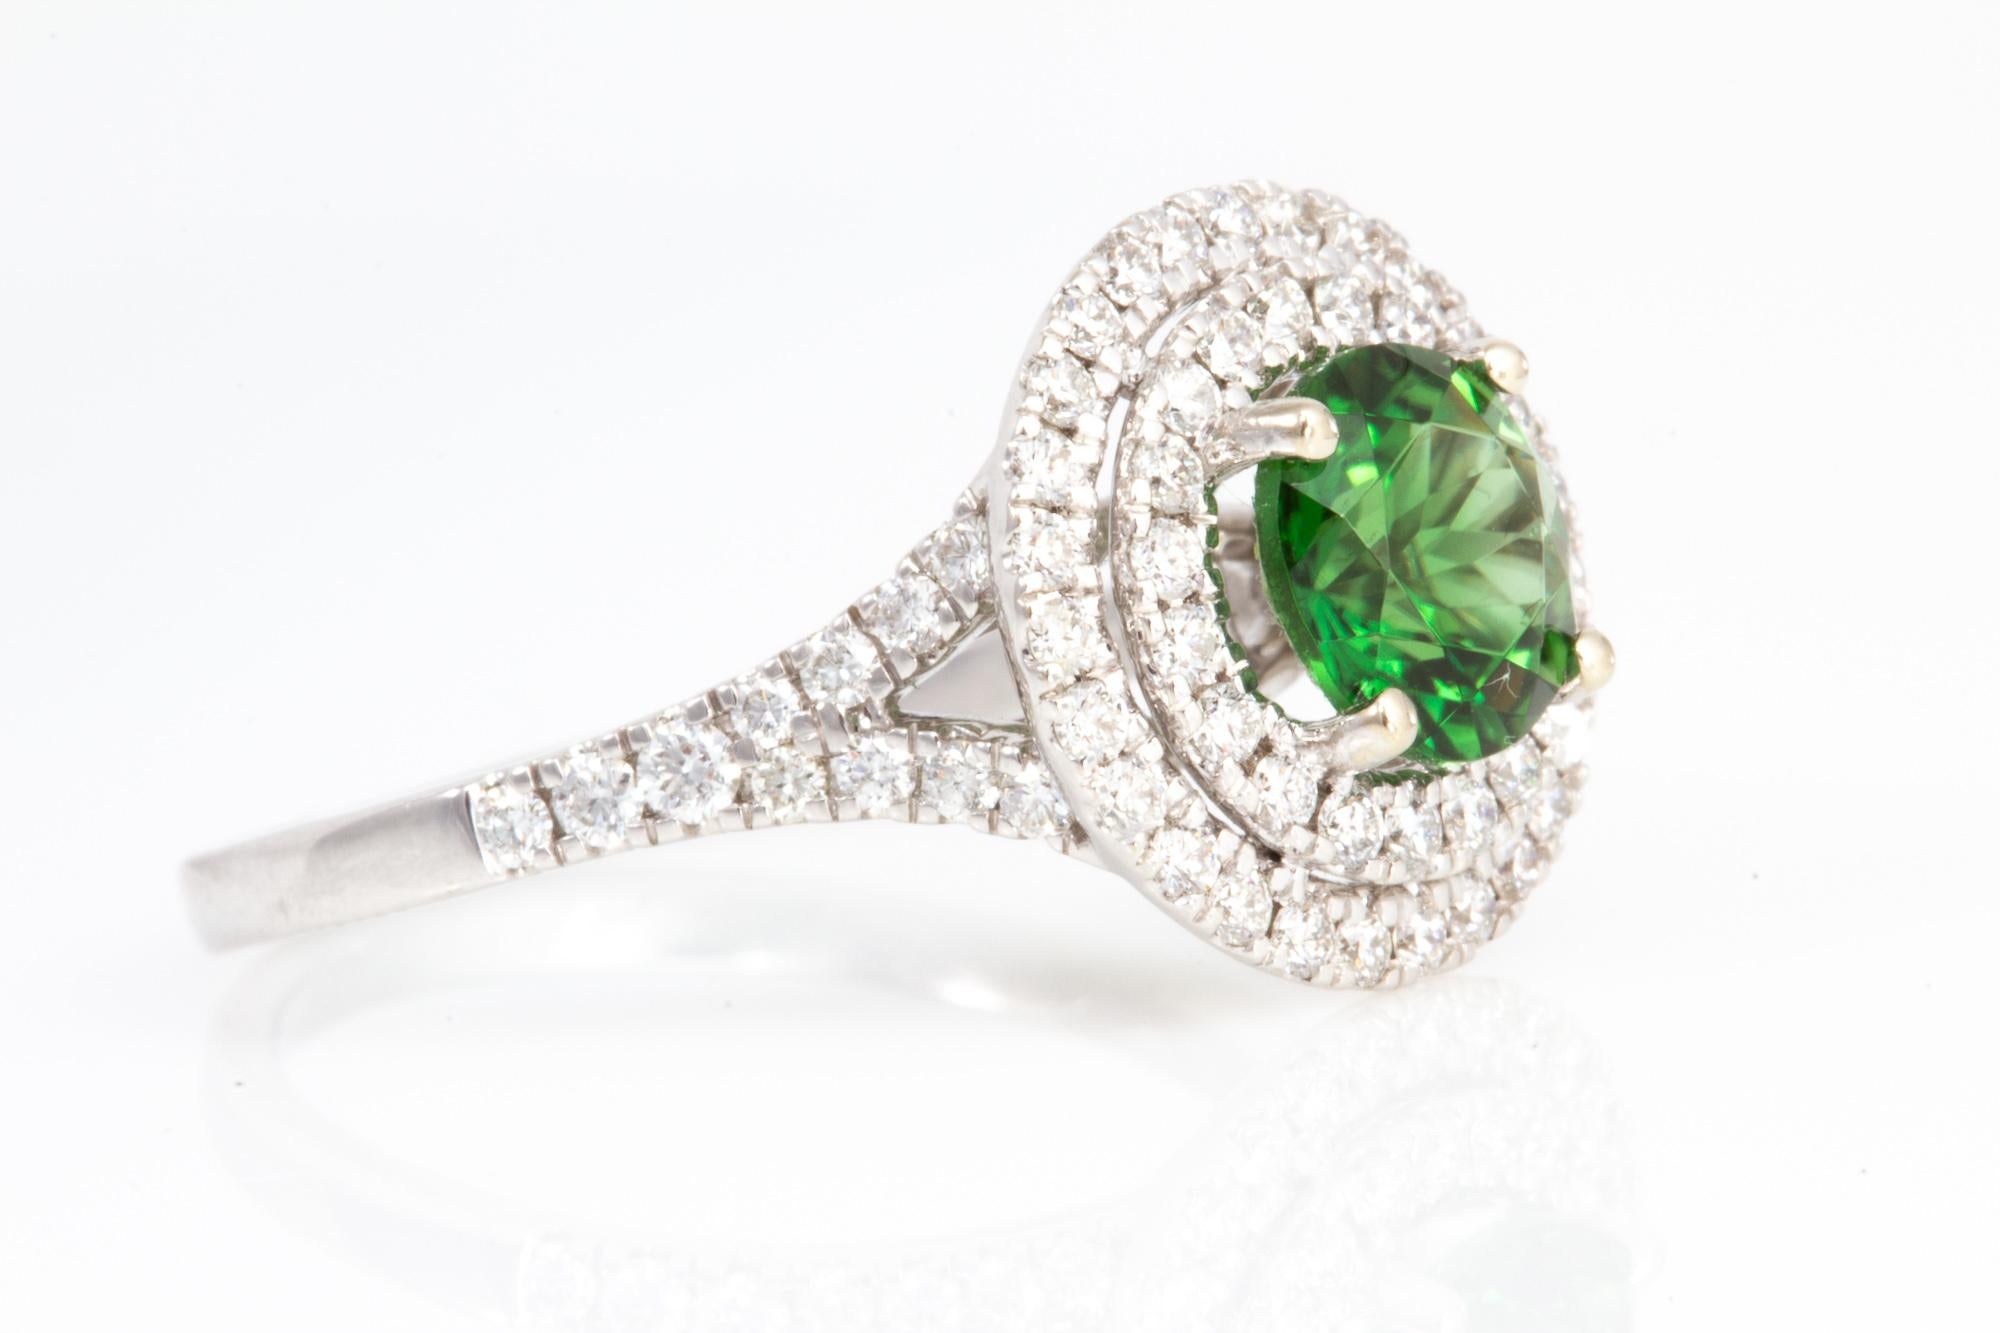 Exceptionally Well Cut 1.26 Carat Chrome Tourmaline and Diamond Ring 7